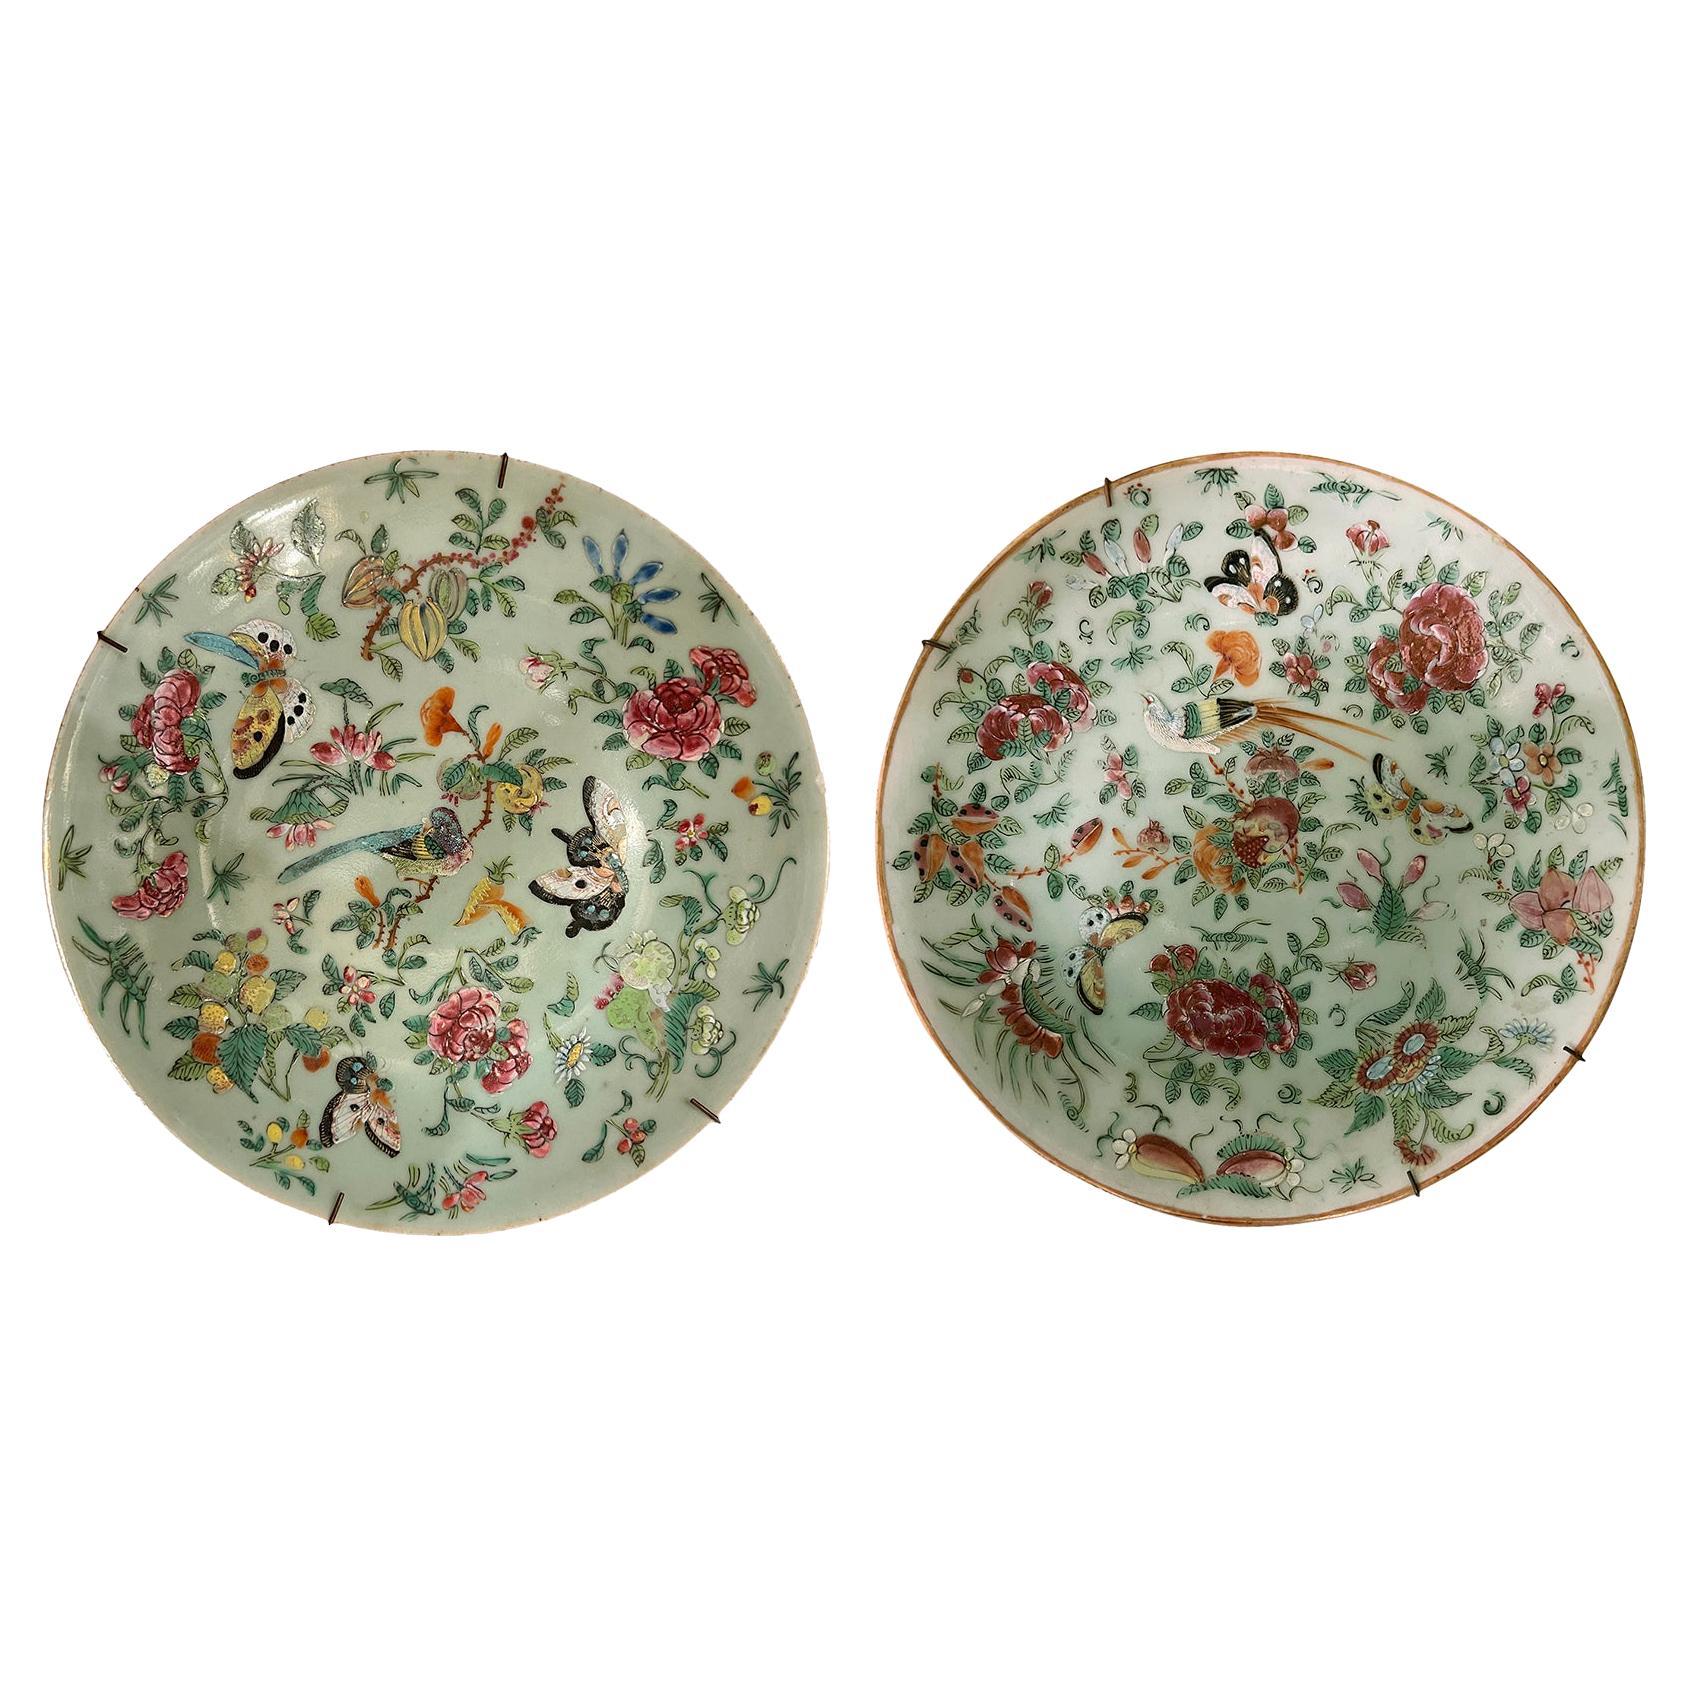 Pair of Porcelain Hand-Painted Decorative Plates For Sale